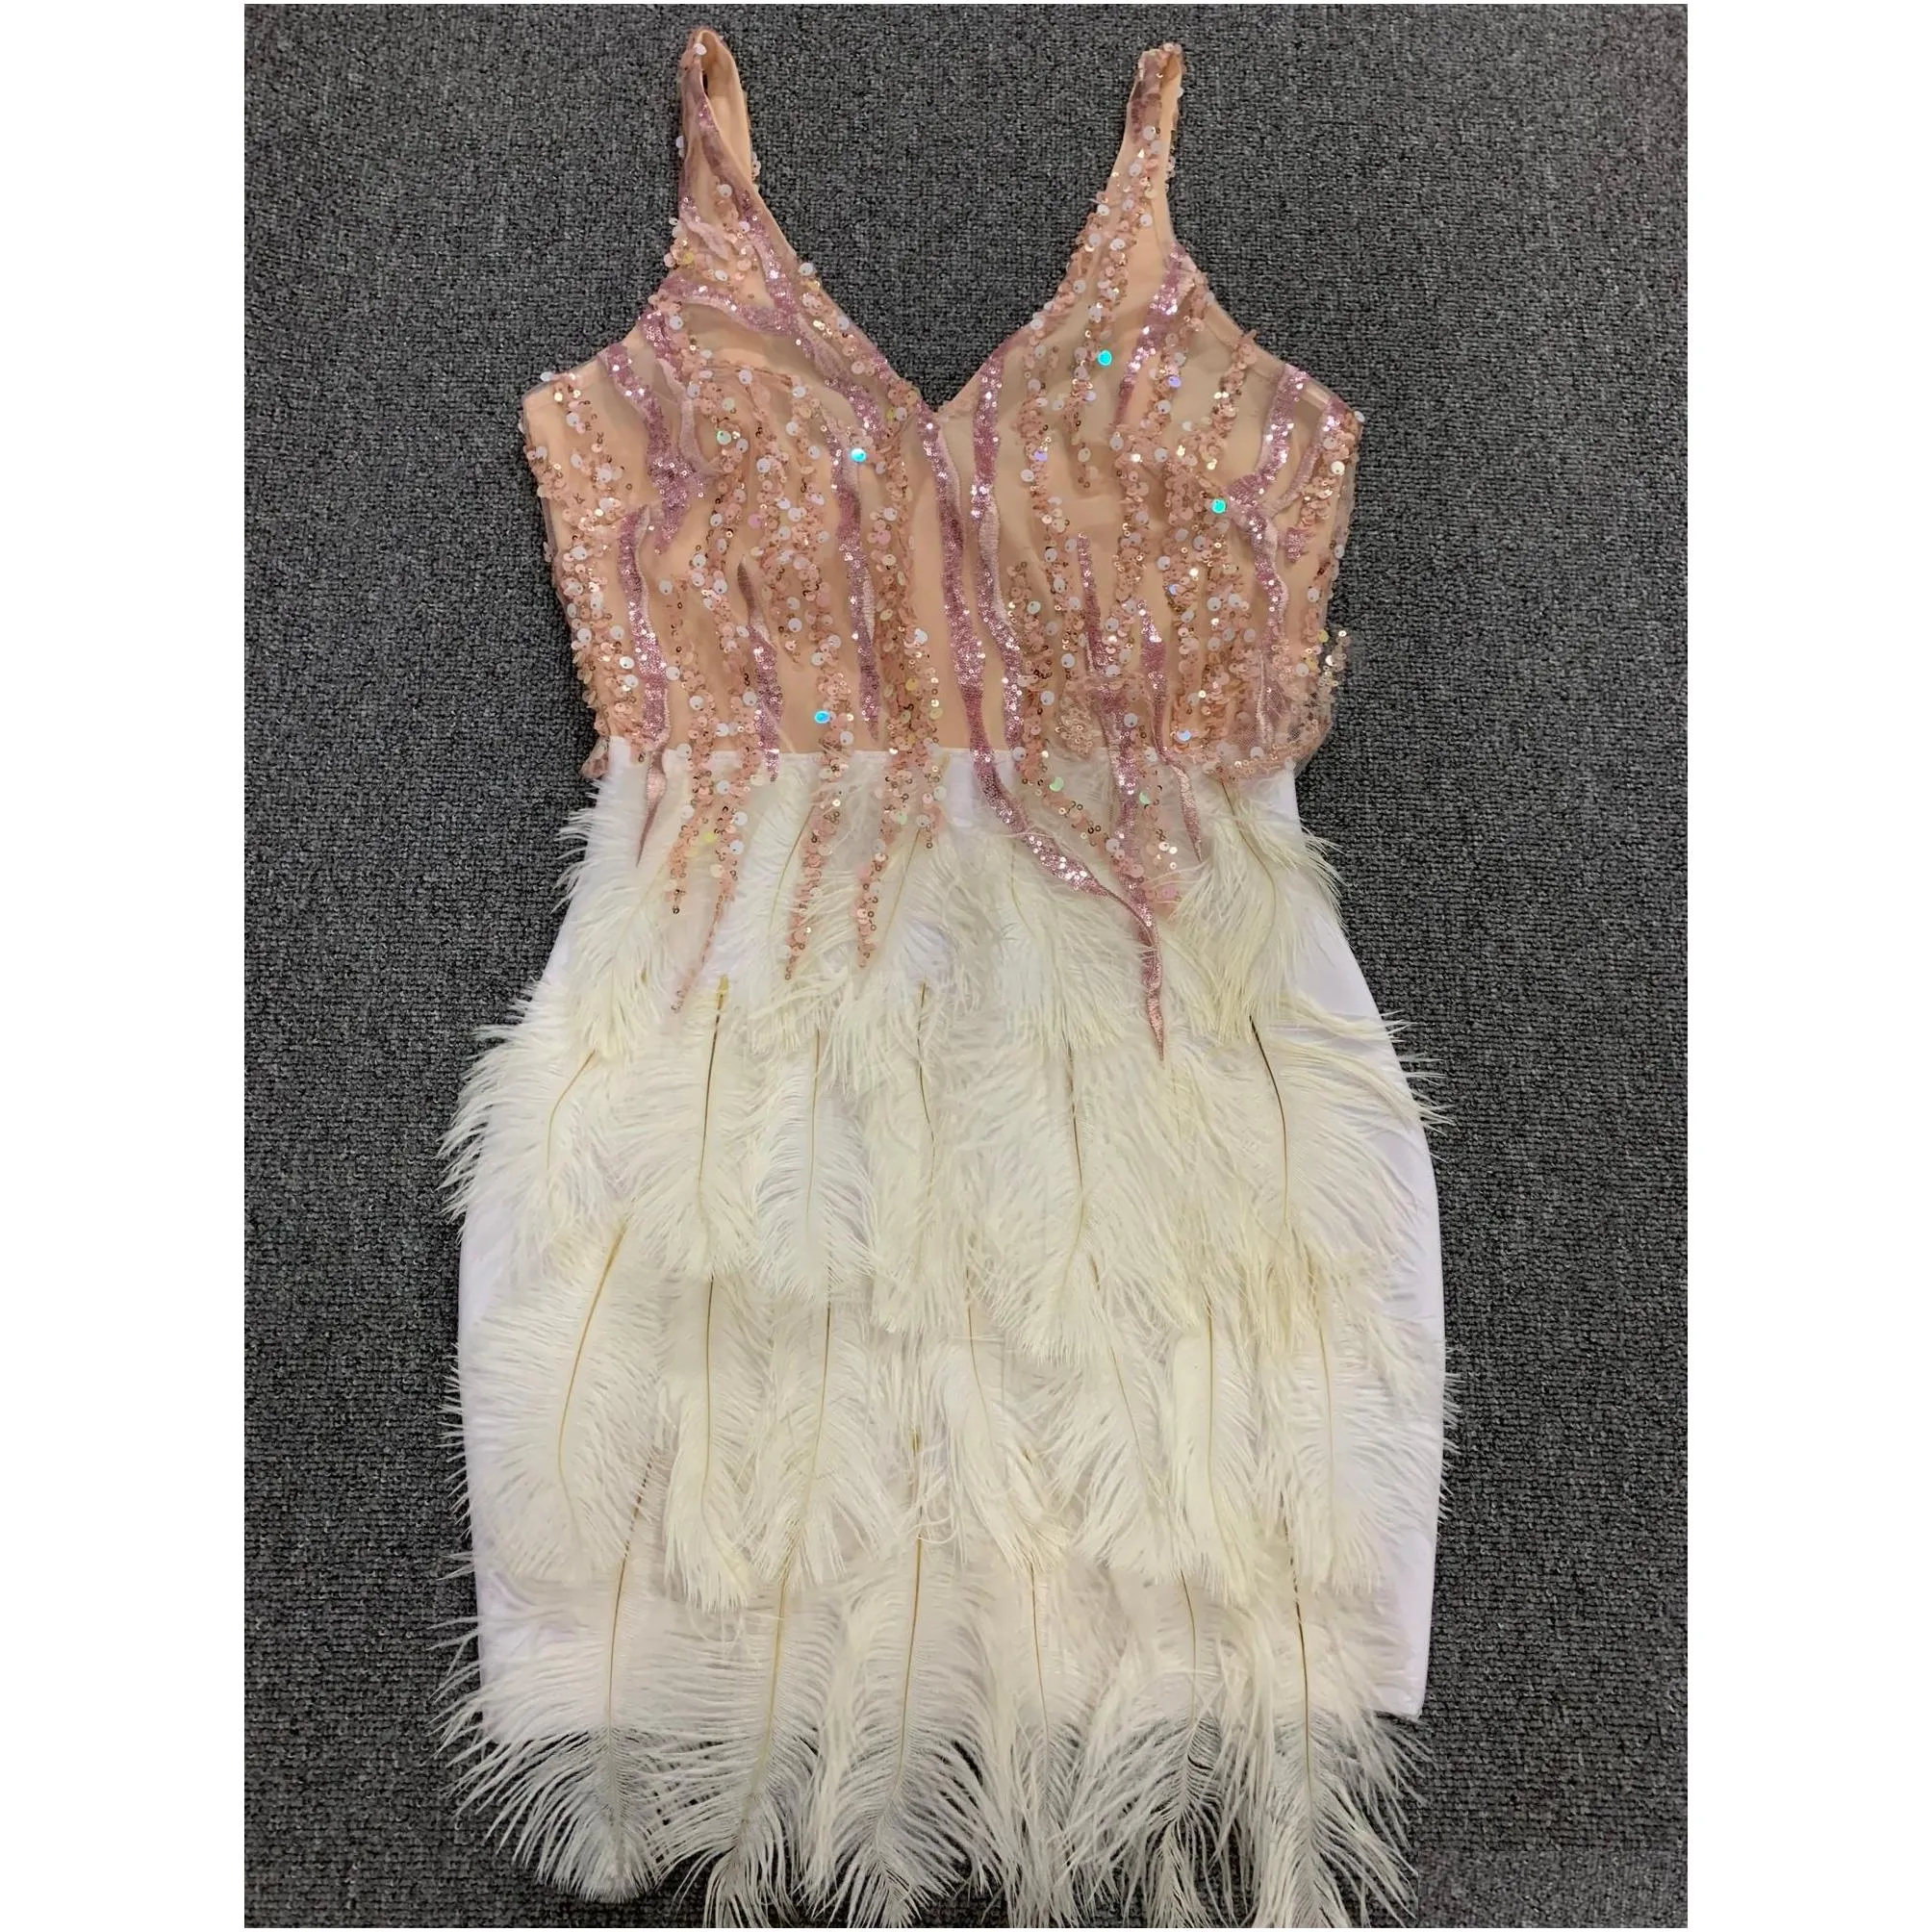 Basic & Casual Dresses High Quality Pink White Feathers Rayon Bandage Dress Elegant Night Club Party Vestidos 230404 Drop Delivery Ap Dhmke